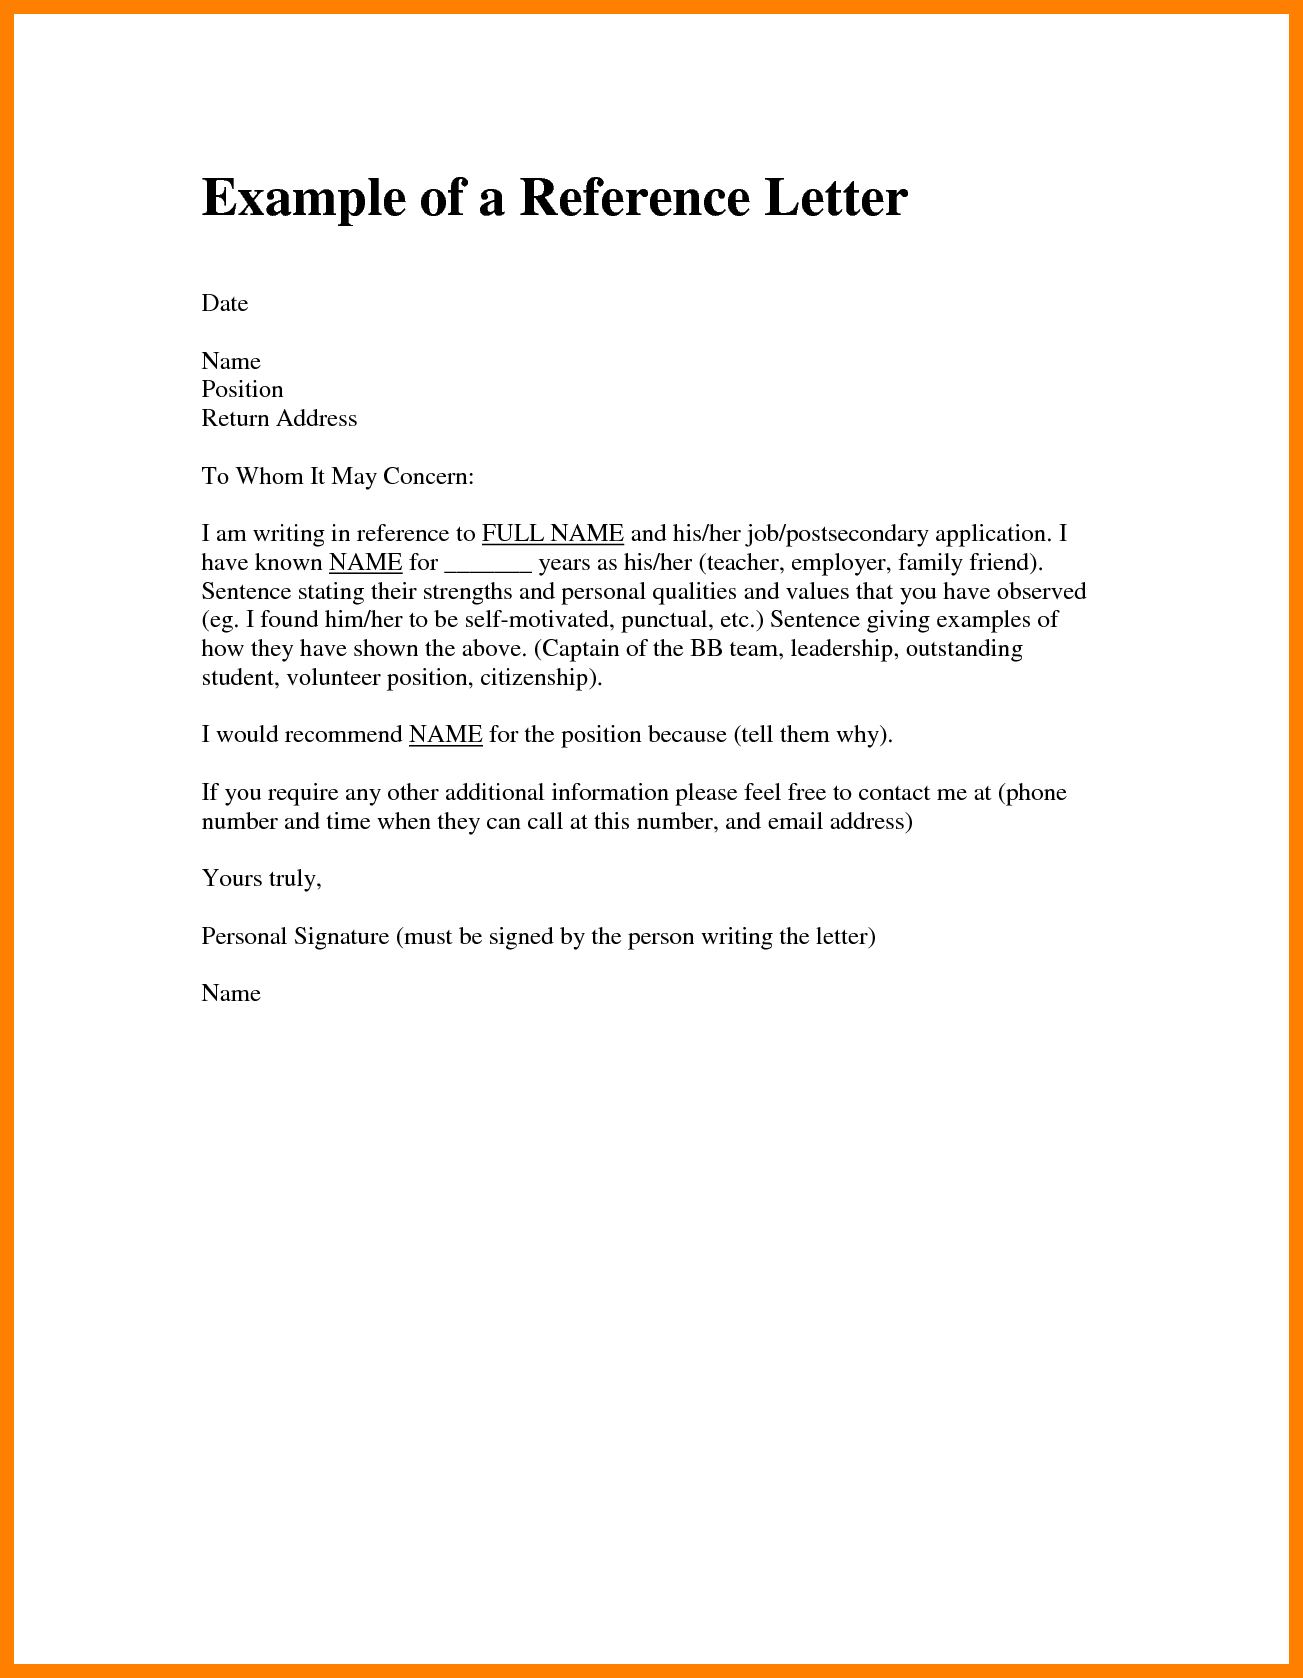 Character Reference Letter For A Friend Writing A in dimensions 1303 X 1678